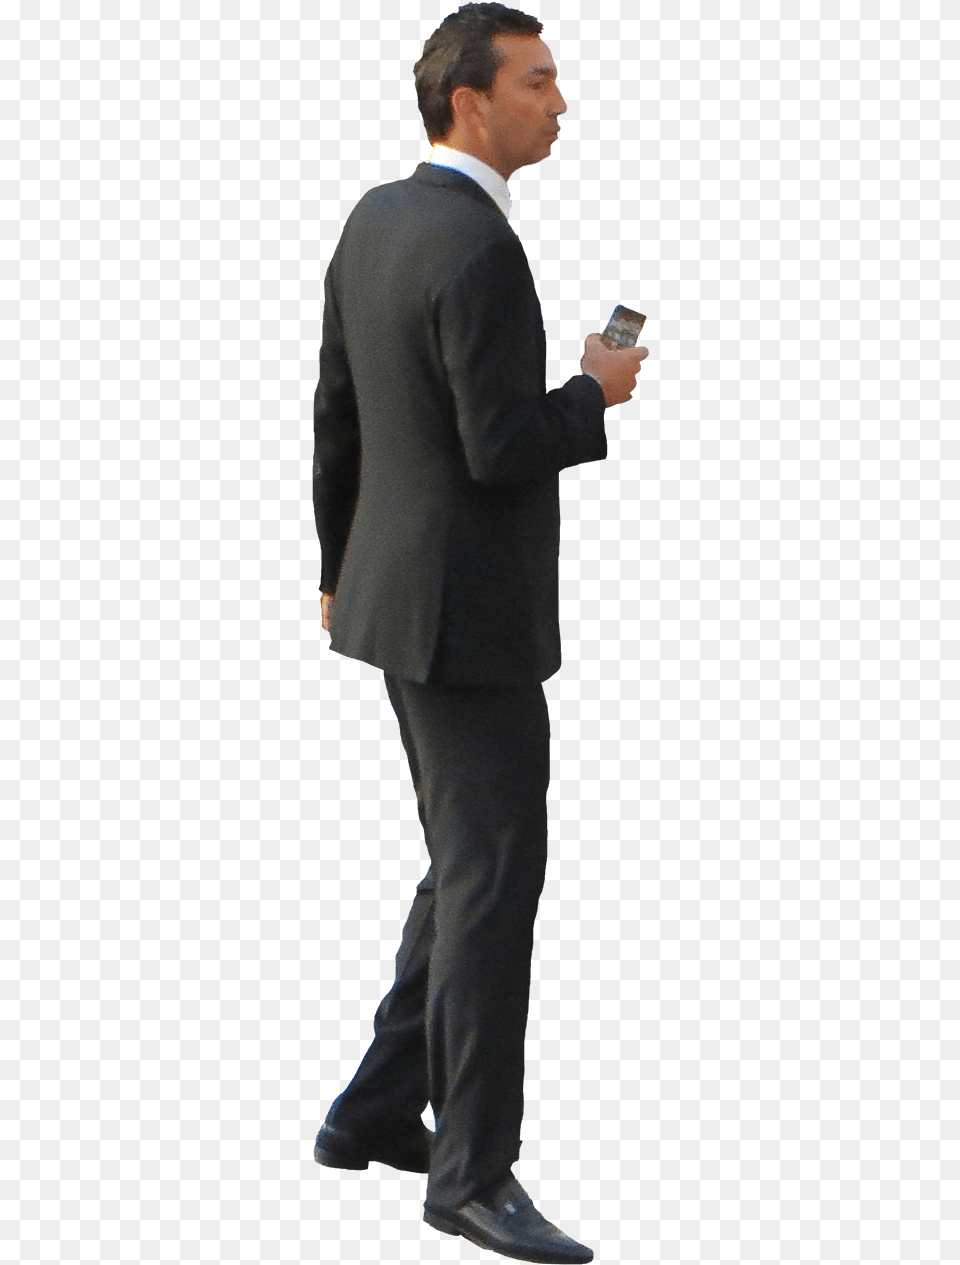 Person In A Suit Person In A Suit People Rendering, Tuxedo, Clothing, Formal Wear, Man Free Transparent Png